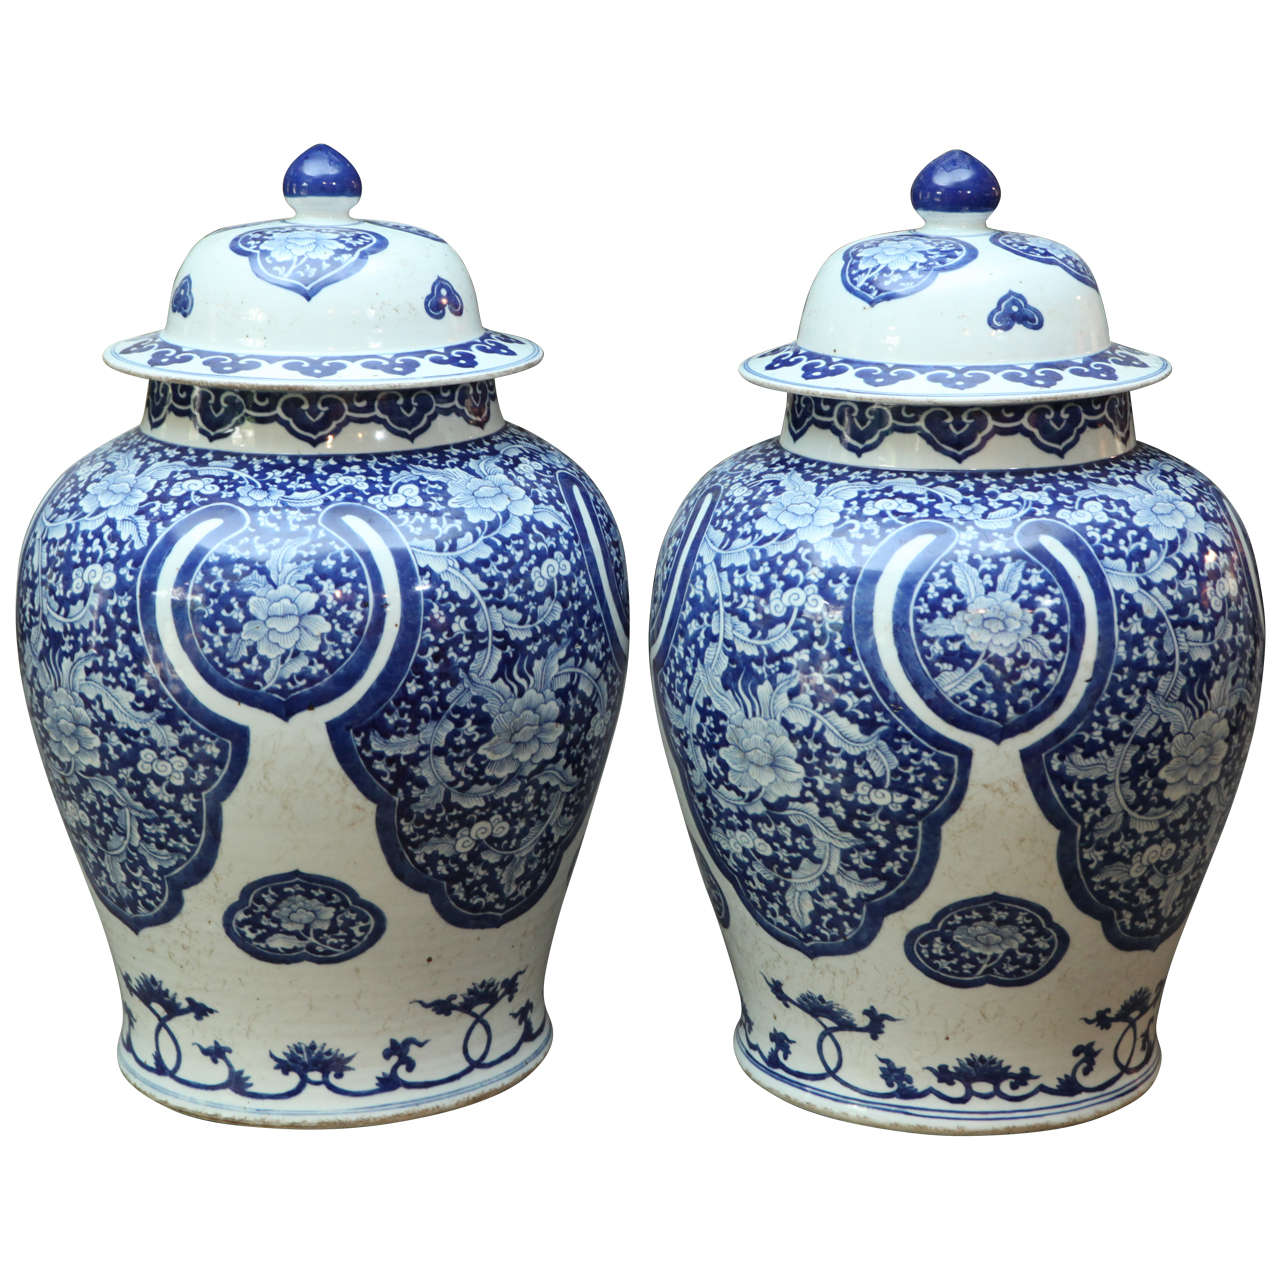 A Pair of Chinese Ginger Jars, 19th c.